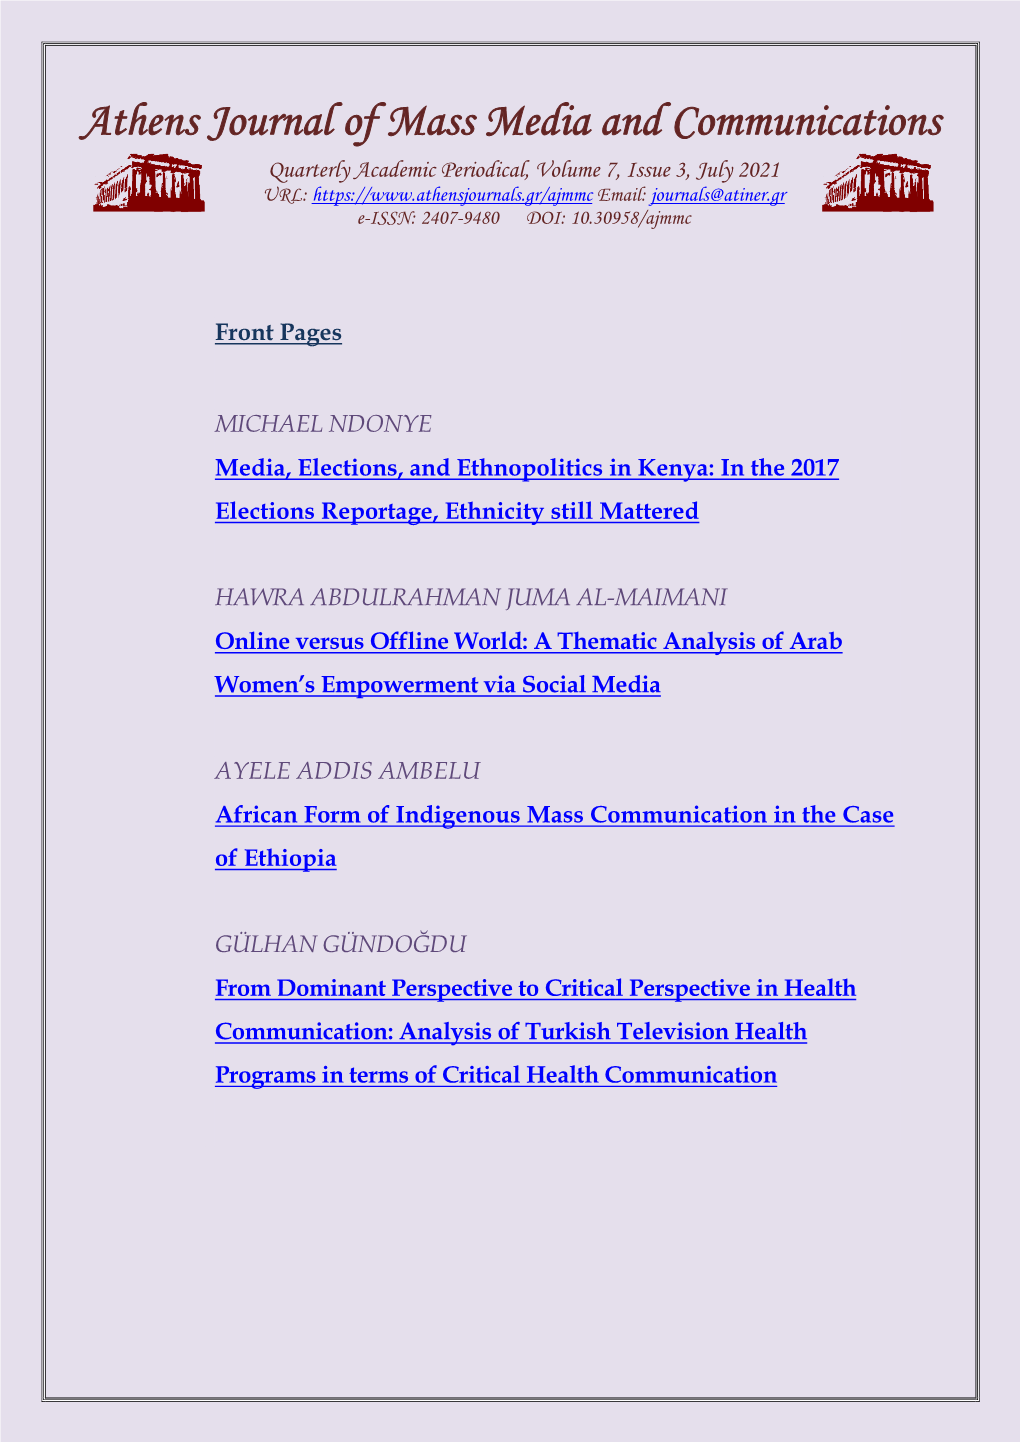 Athens Journal of Mass Media and Communications